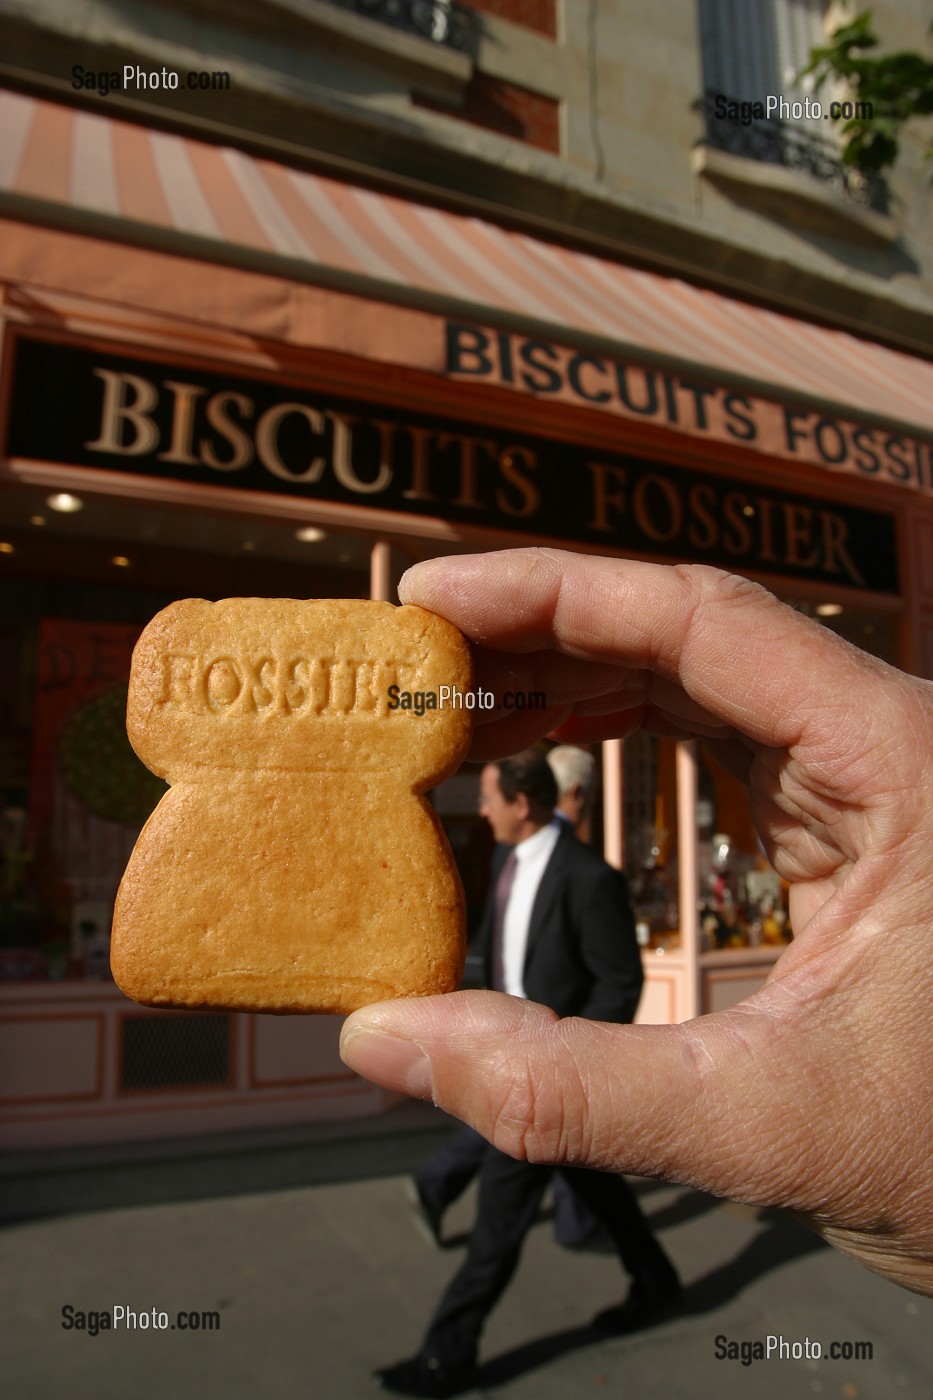 BISCUITERIE FOSSIER A REIMS, AVEC LE FAMEUX BISCUIT ROSE, MARNE (51) 